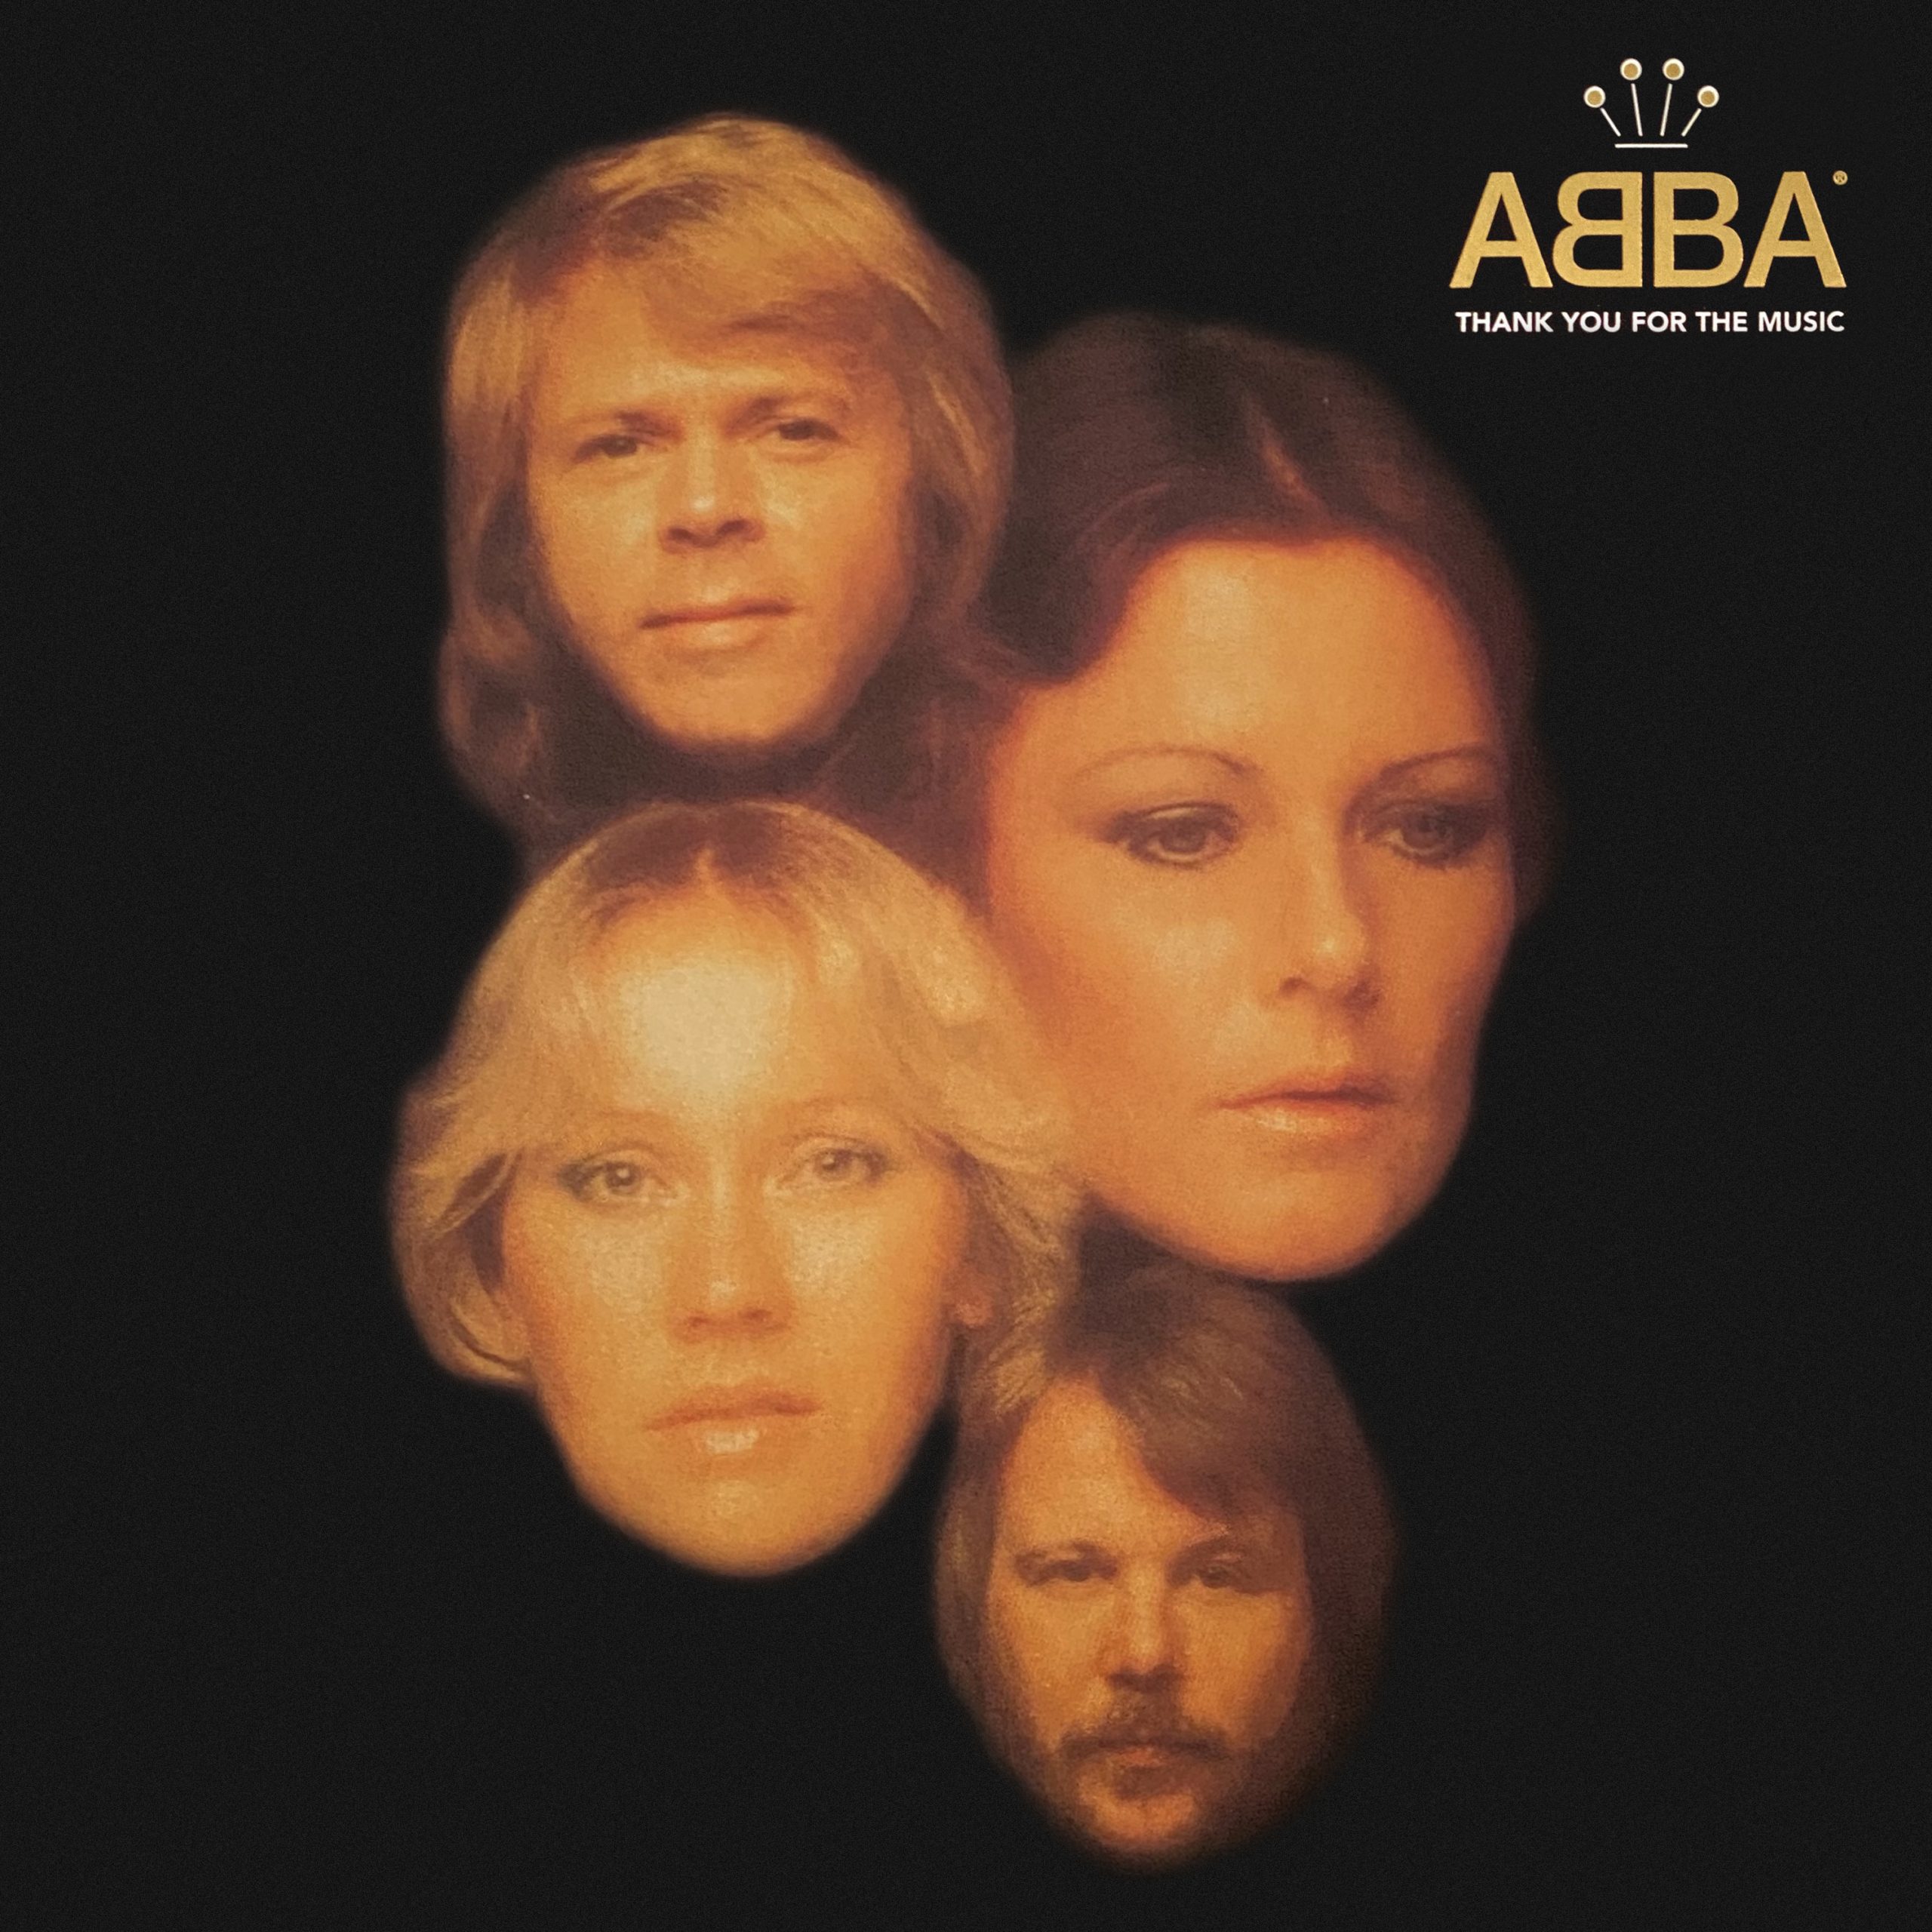 ABBA Thank you for the music album cover